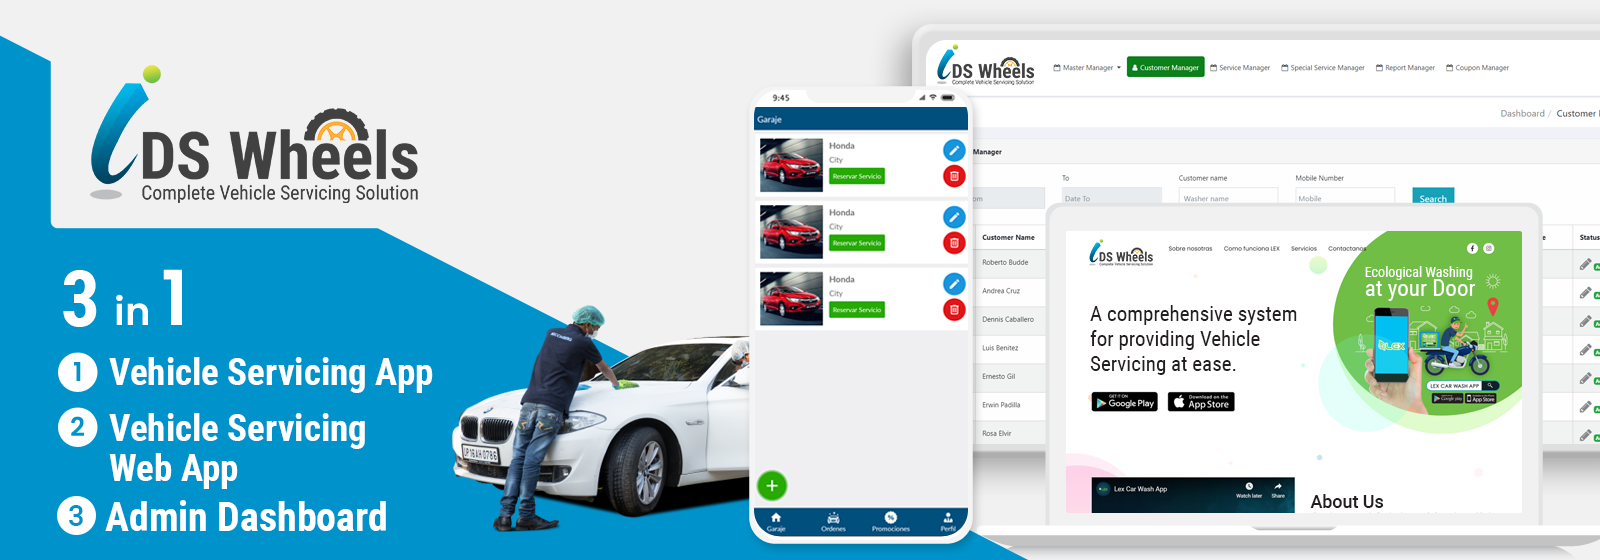 online-vehicle-car-servicing-system-solution-Development-in-India